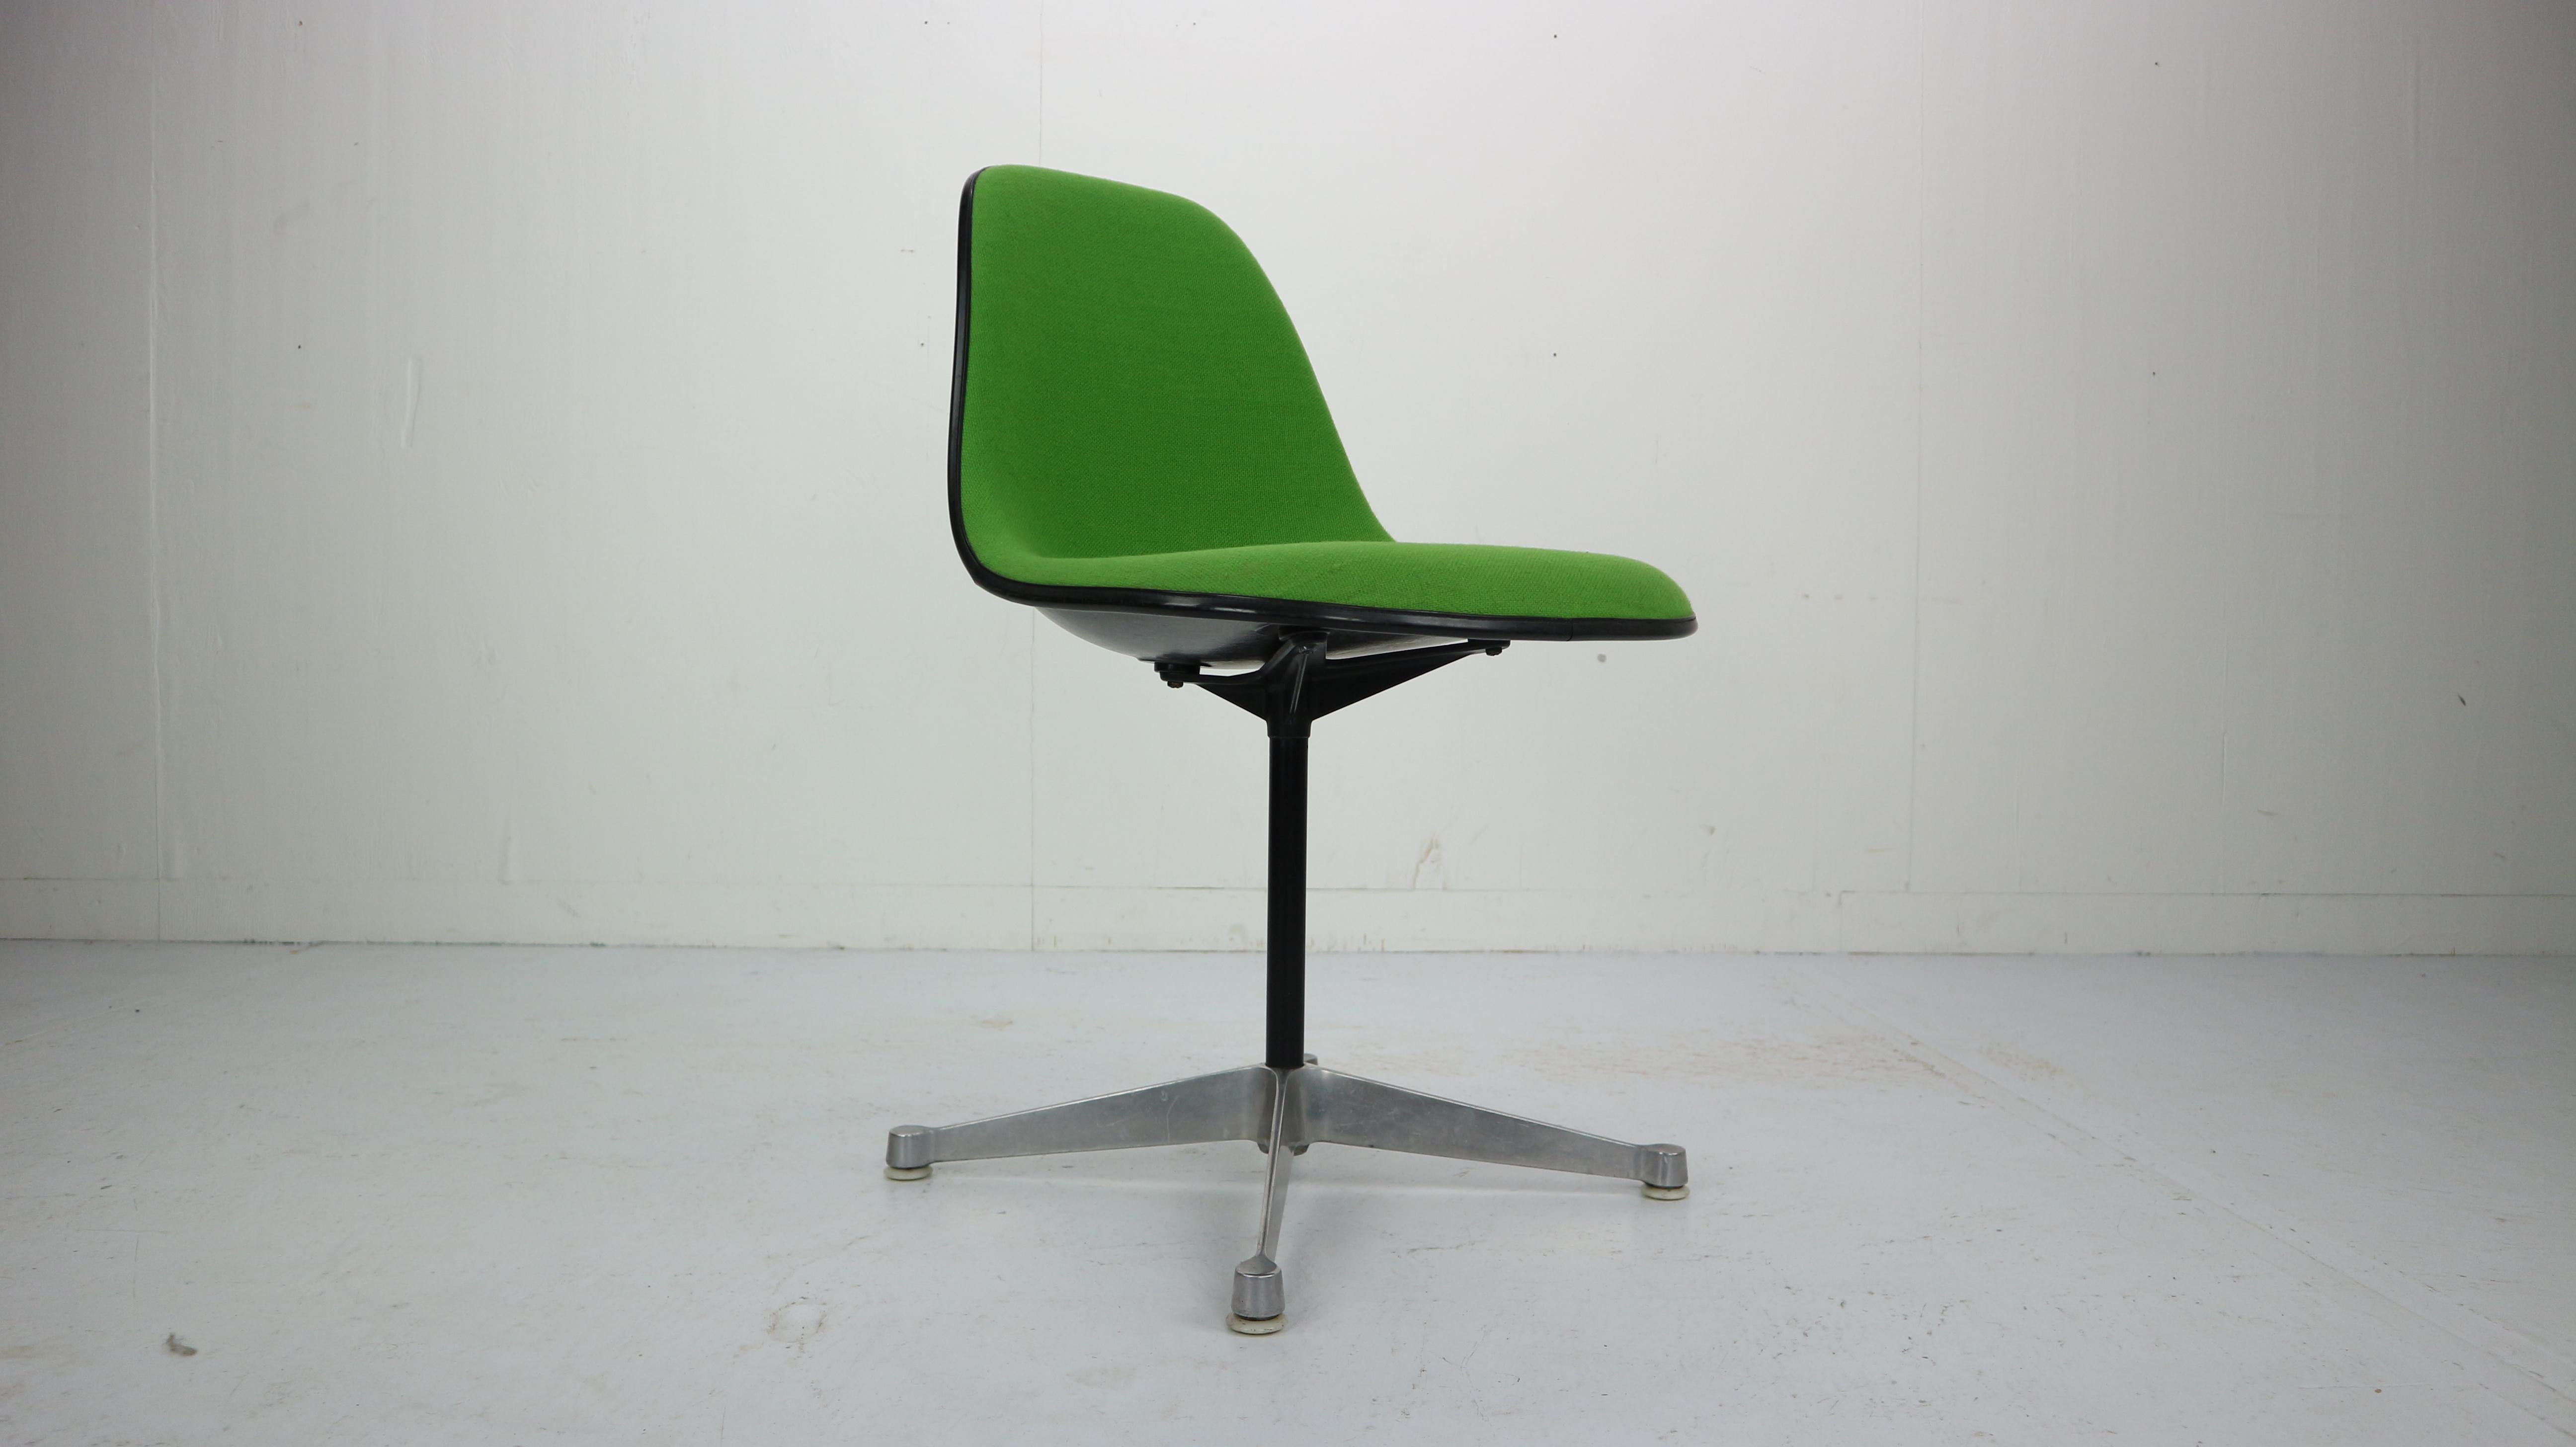 An original hopsak vinyl upholstered Charles and Ray Eames black fibreglass shell chair on contractor swivel base.
Manufactured by Herman Miller in 1970s.
Original mark on the chair.